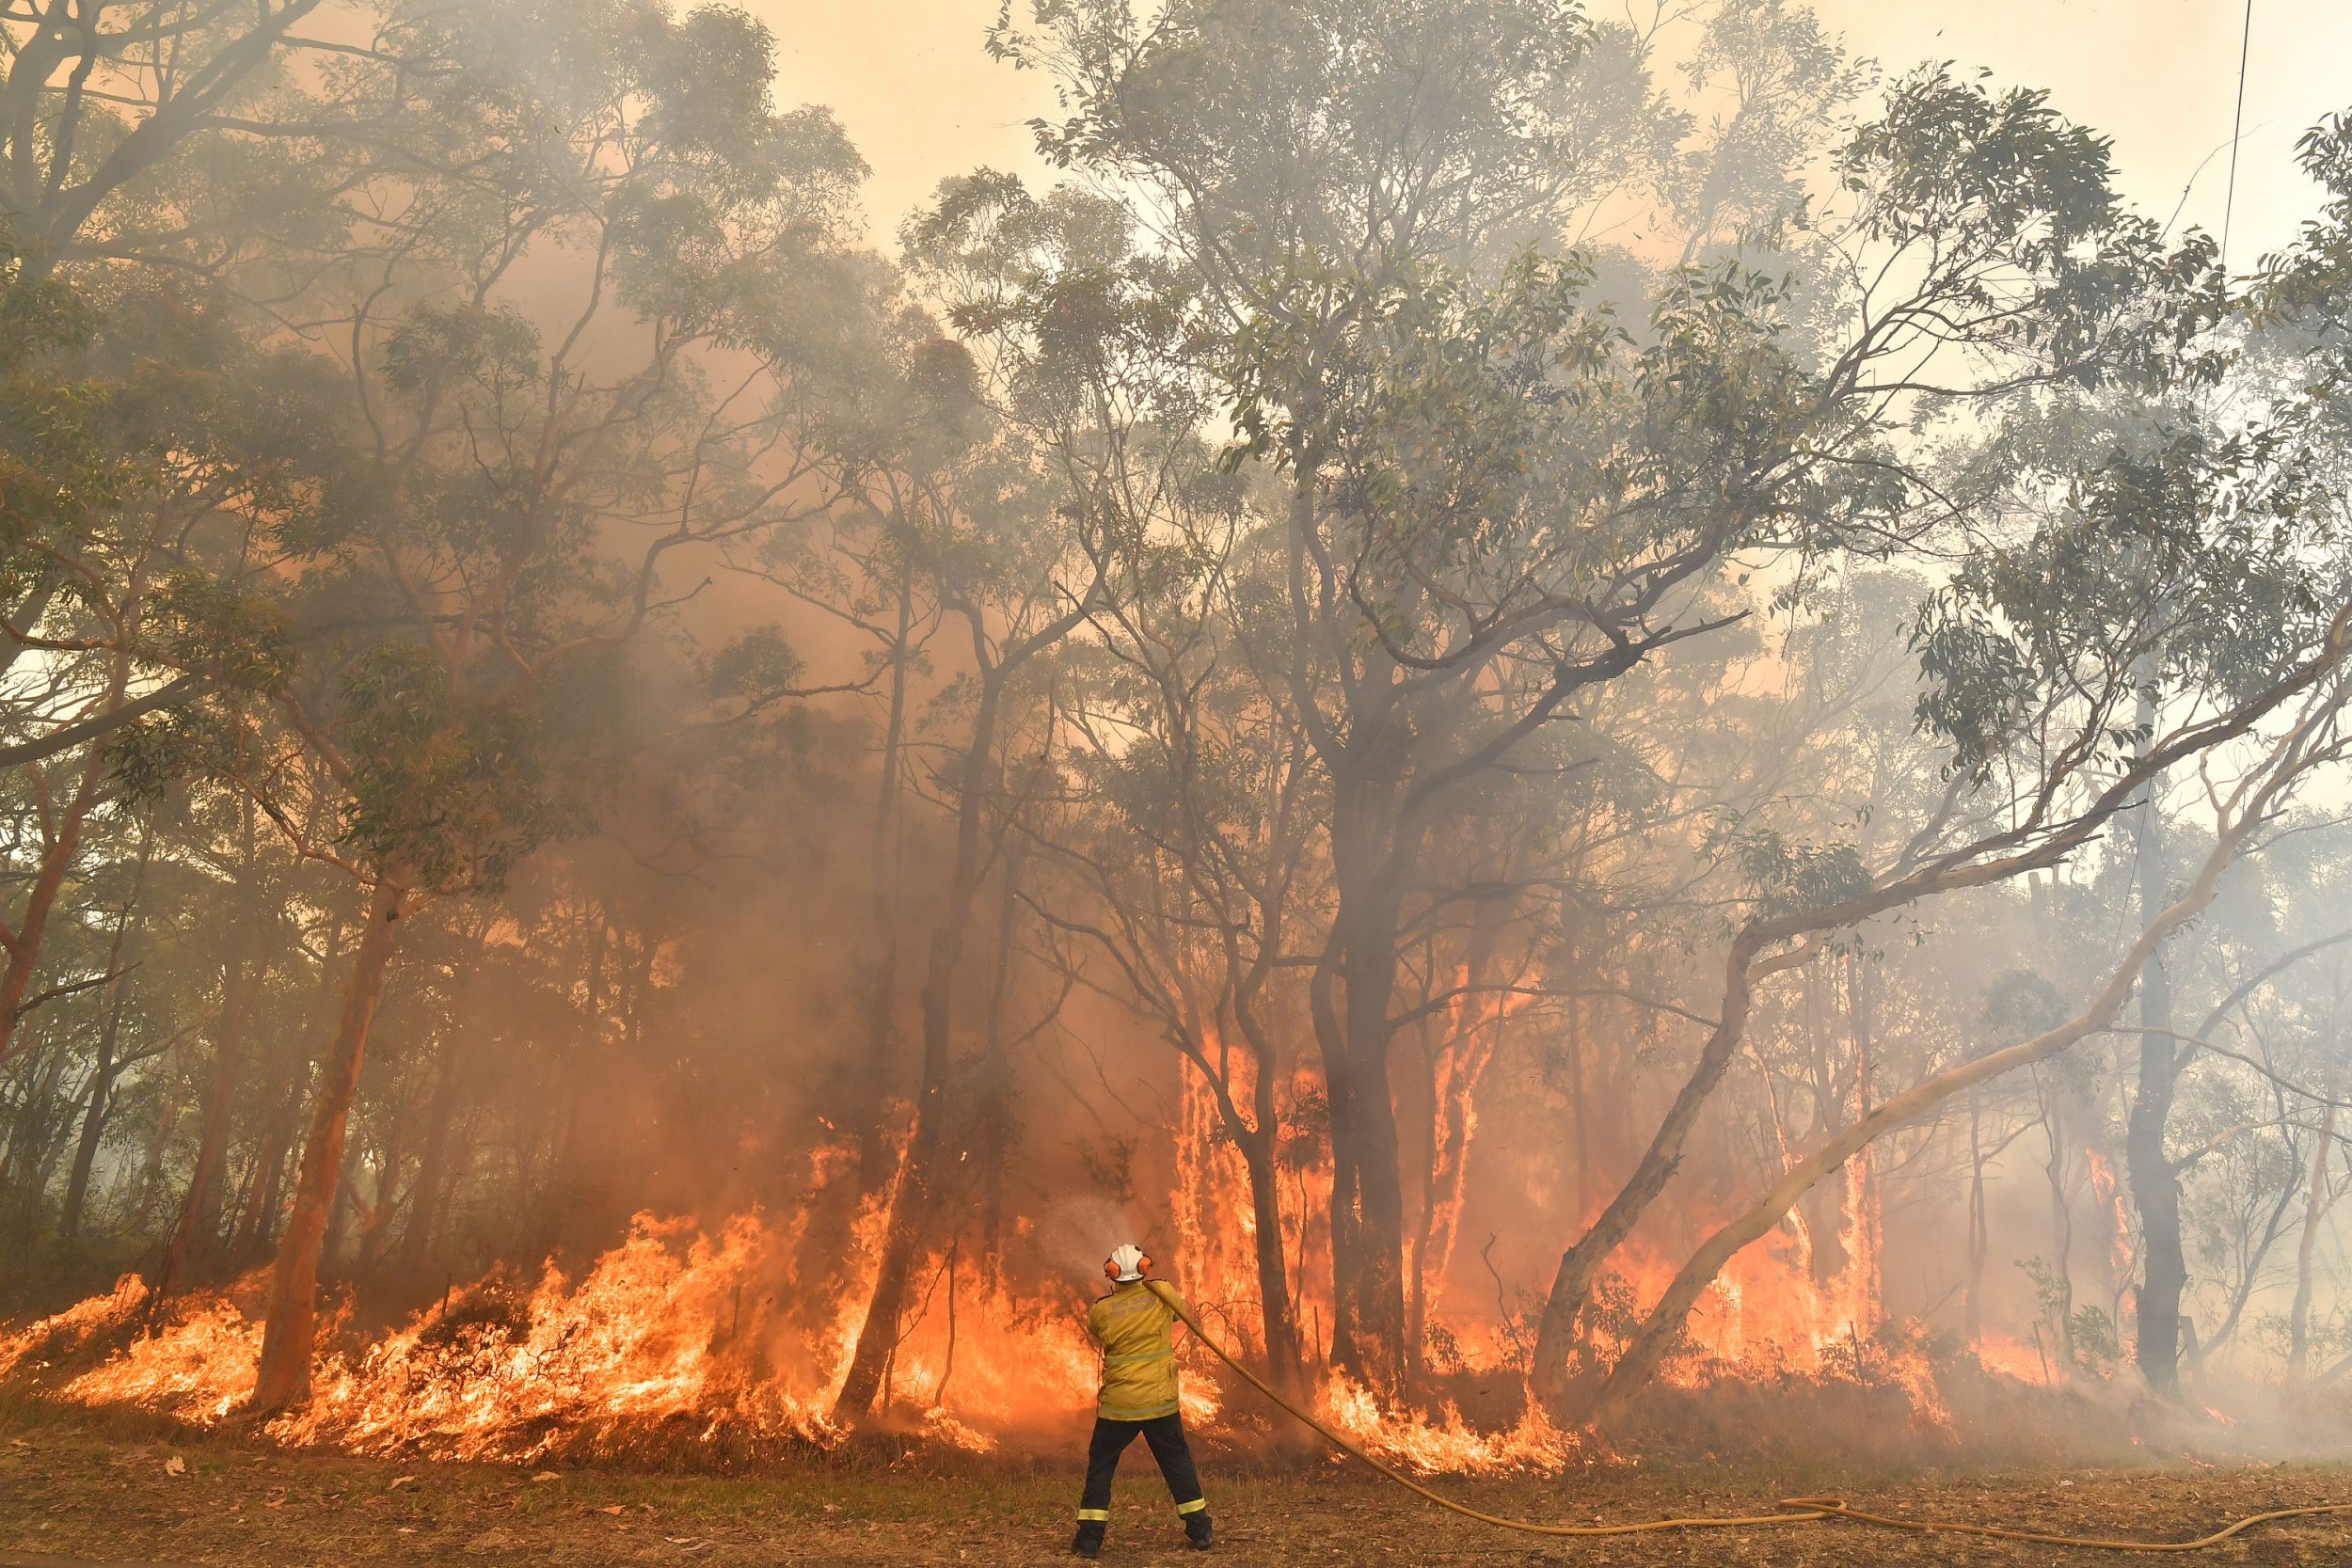 Extreme Ocean Phenomena in 2019 May Have Set Australia Up For The Fires That Ravaged the Country, Study Finds - Newsweek